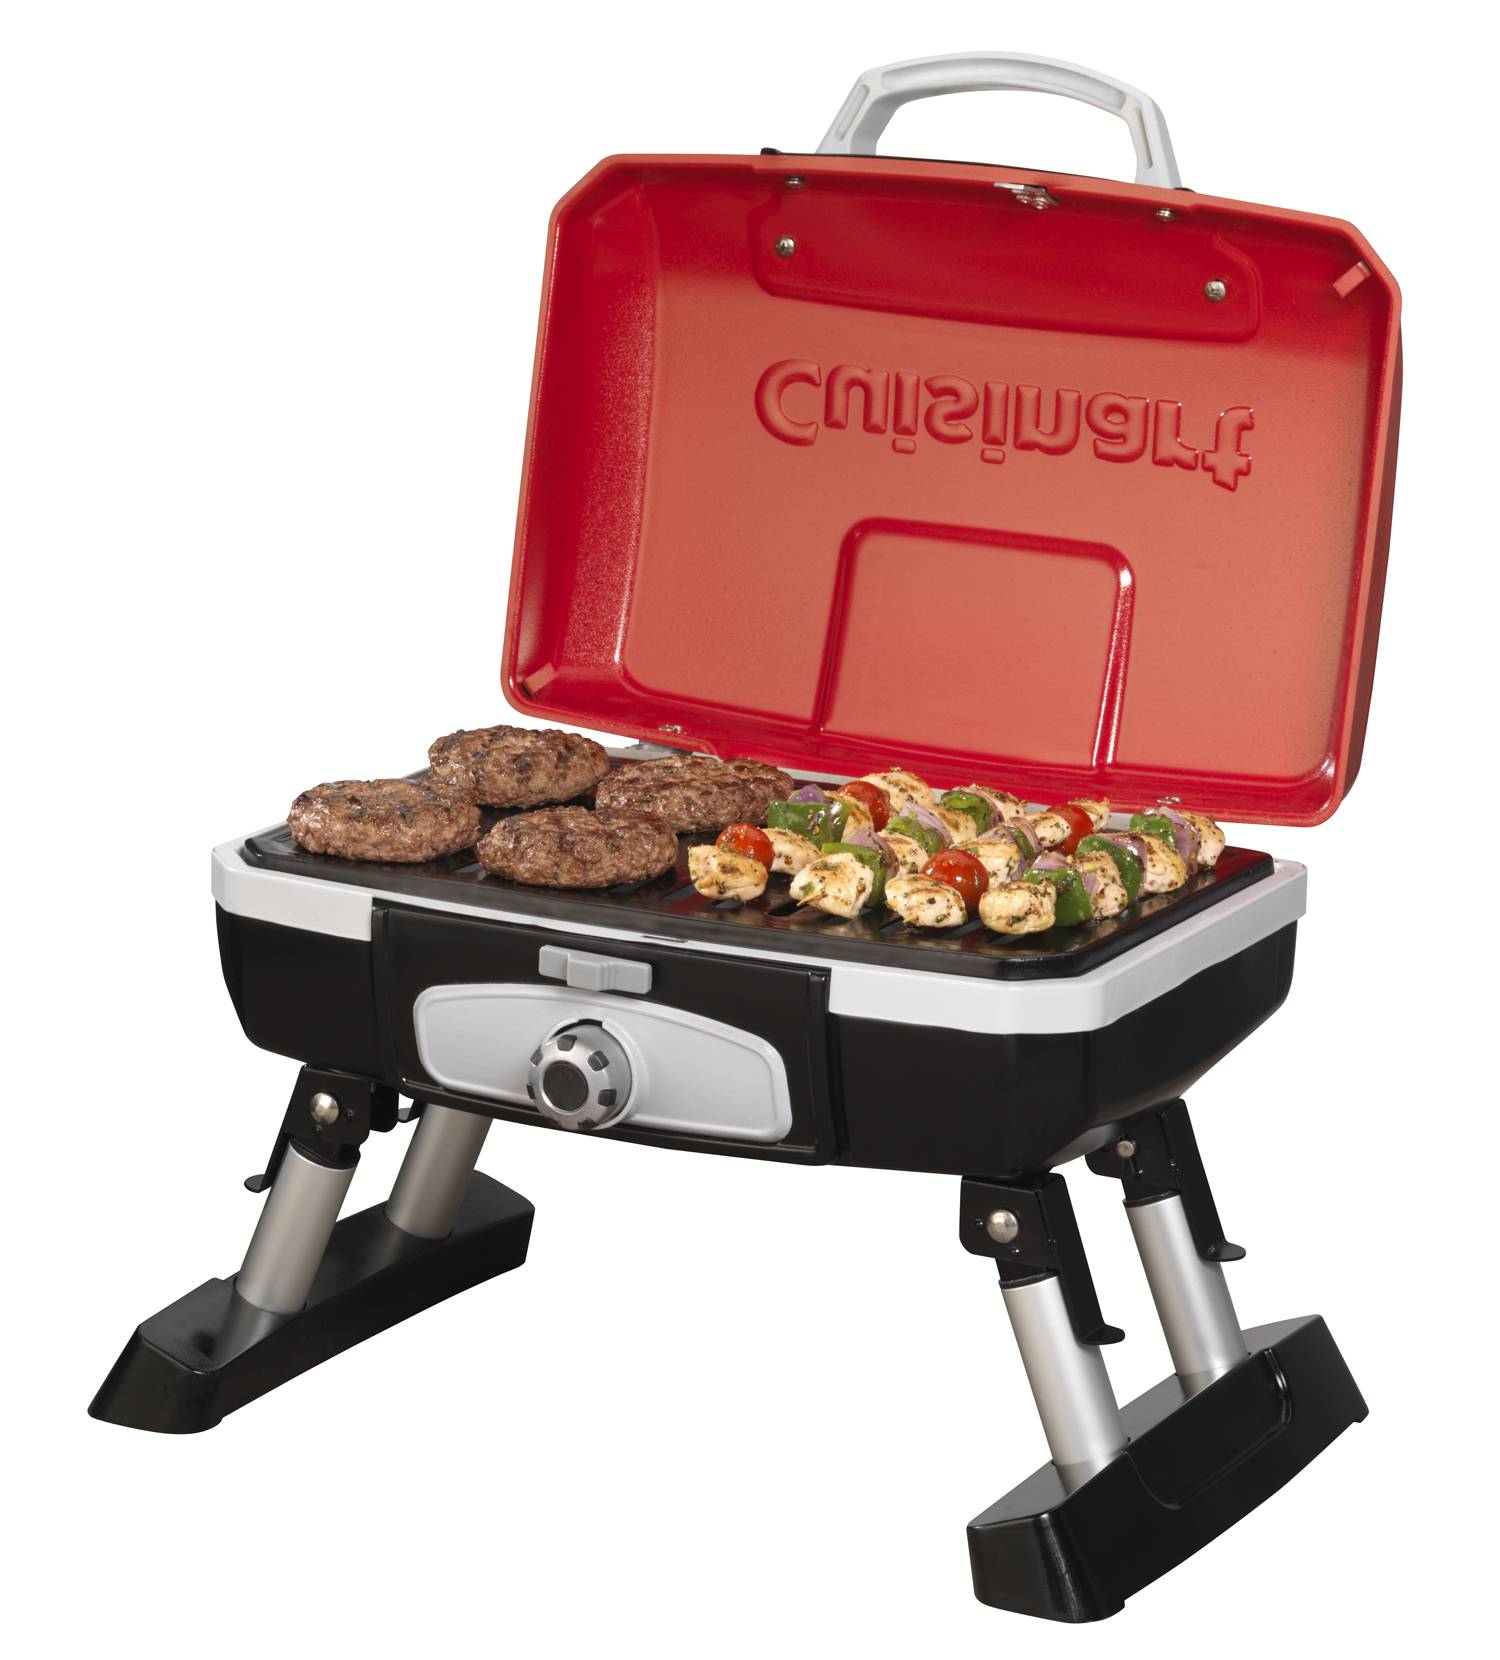 Cuisinart CGG-180T Petite Gourmet Portable Tabletop Outdoor Gas Grill, Red - image 2 of 9